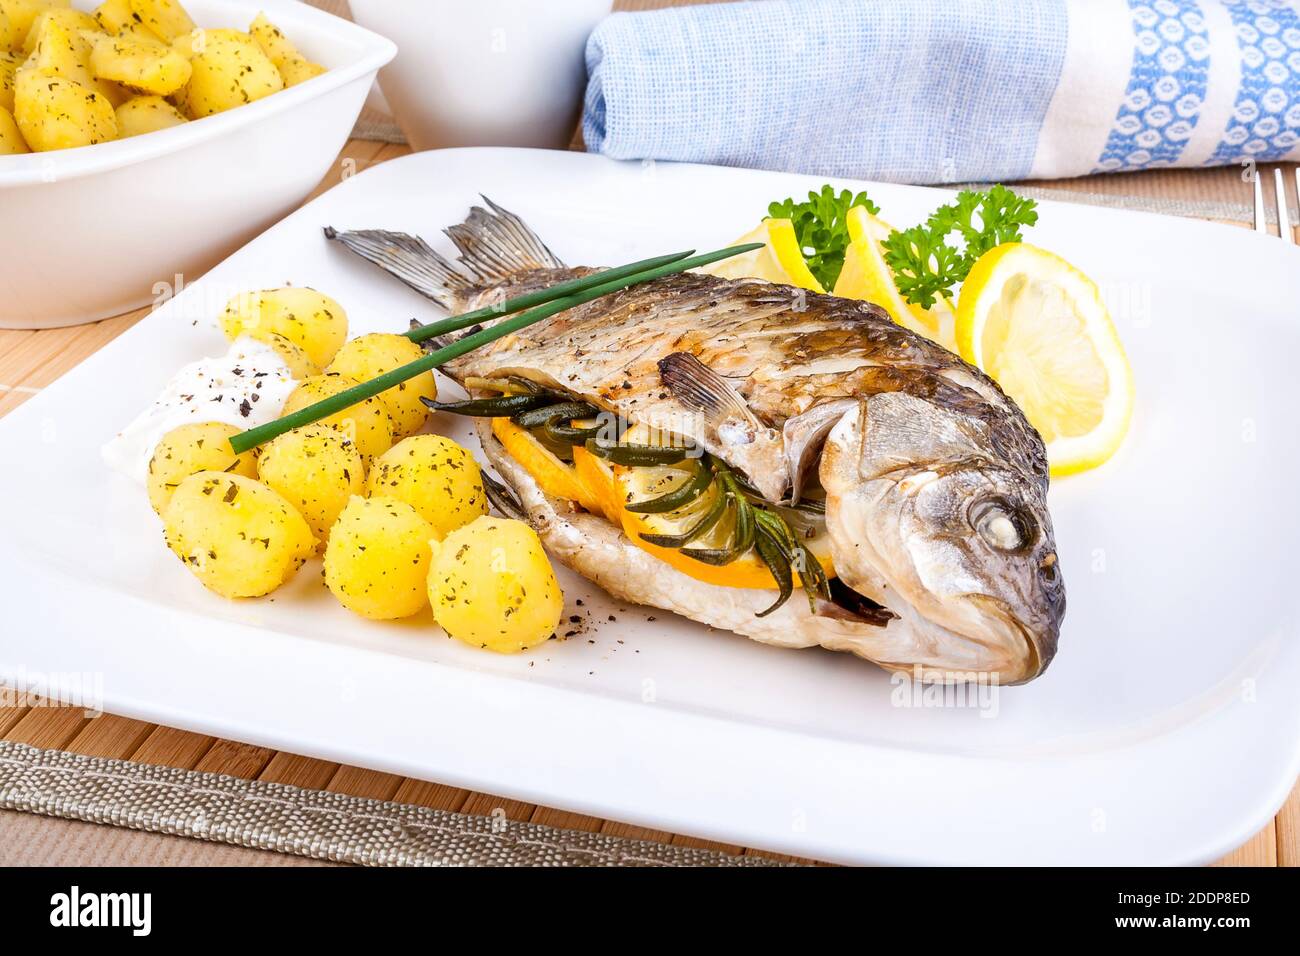 Grilled fish with potatoes, sauce, lemon and cutlery Stock Photo